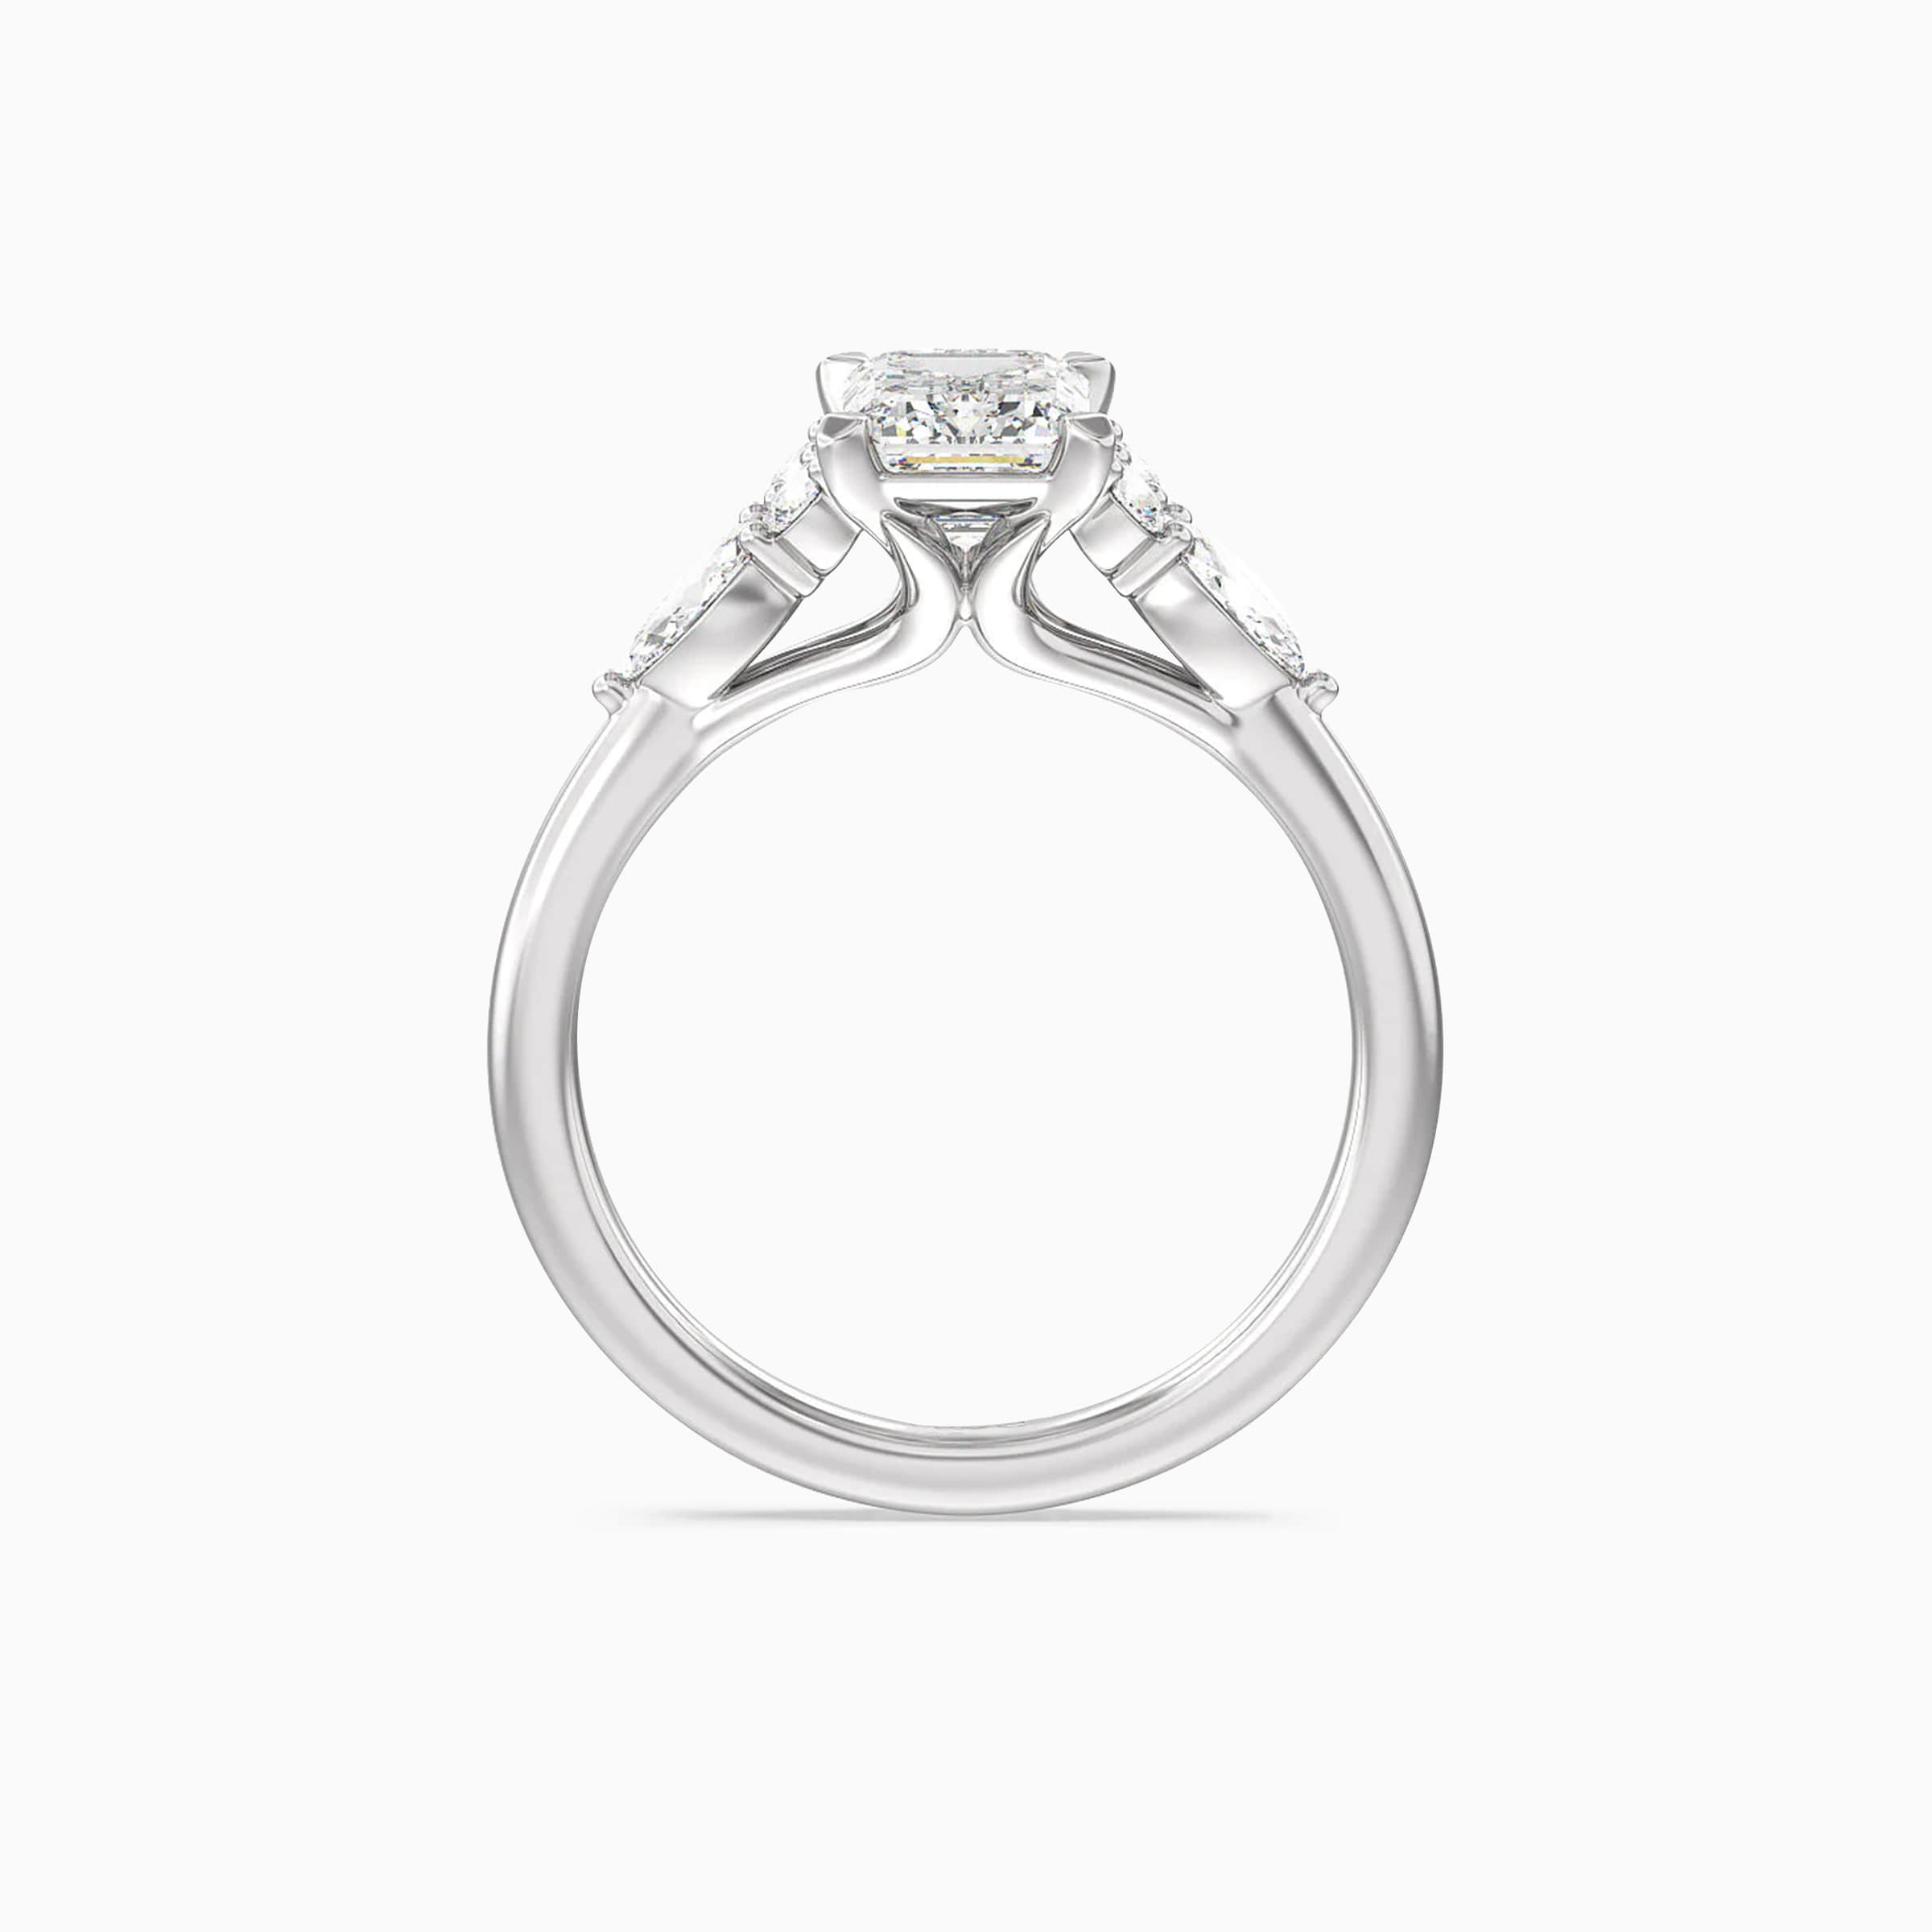 Darry Ring emerald cut engagement ring with side stones